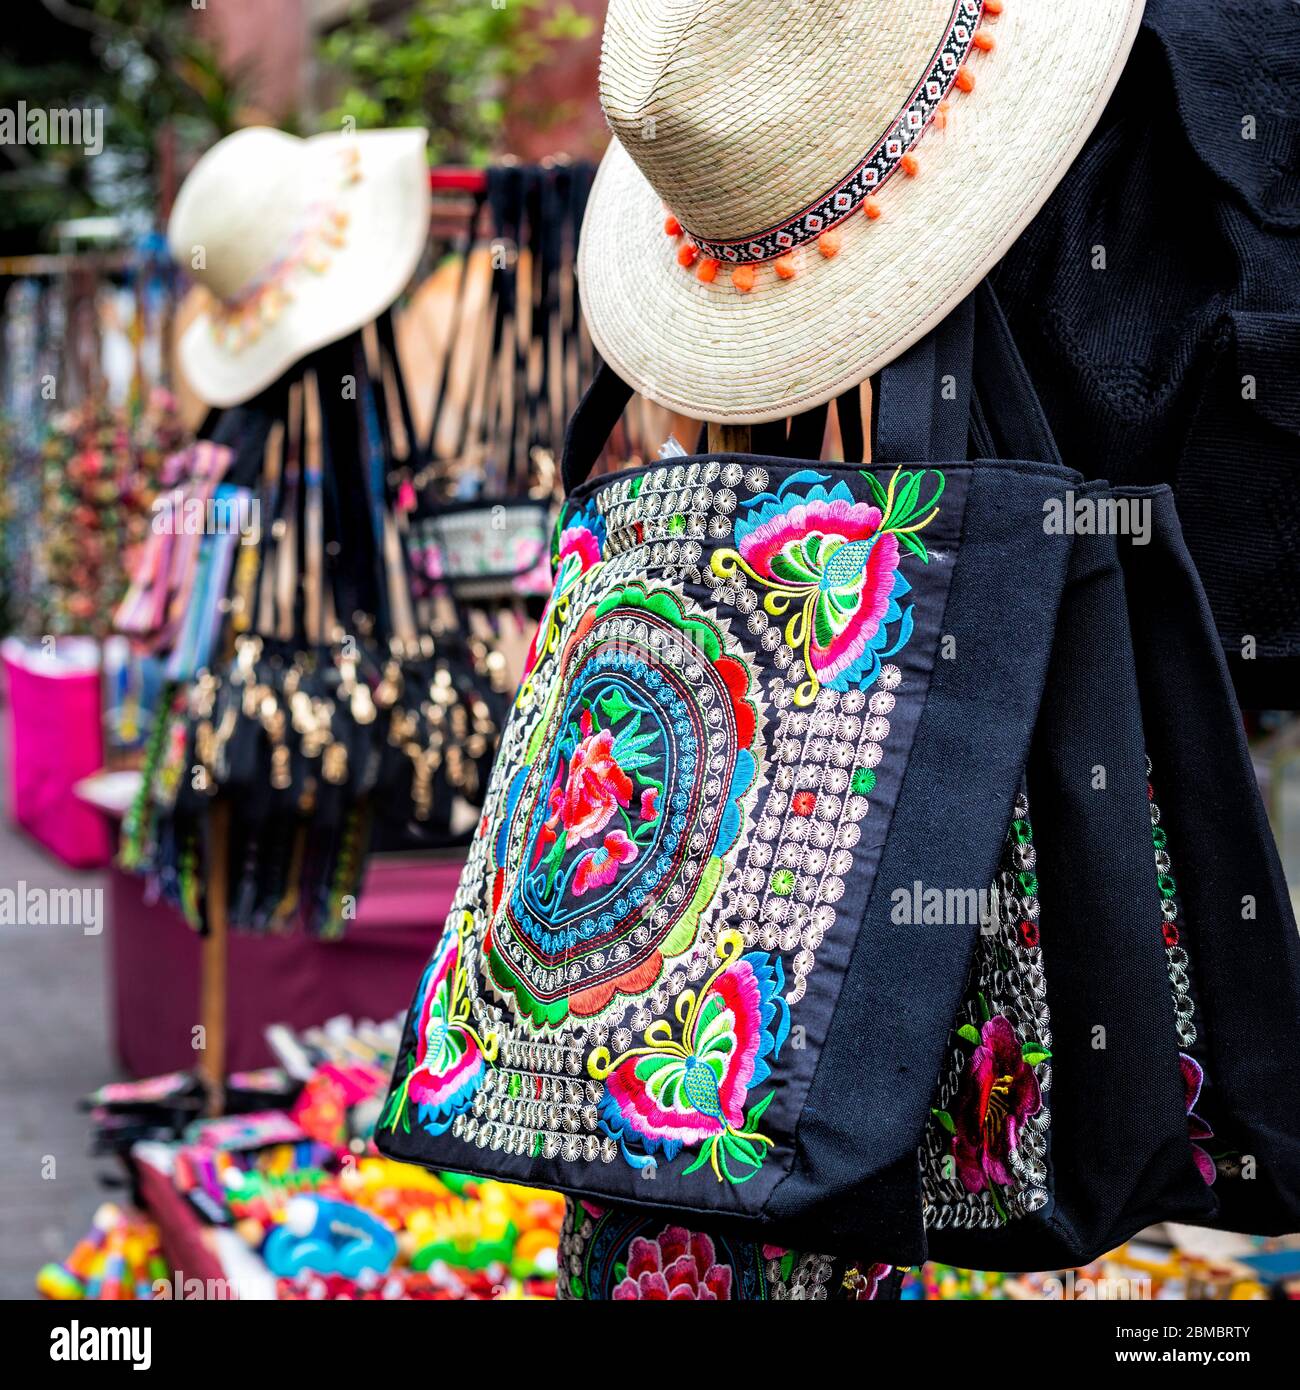 Intricately decorated purses hand in the Tlaquepaque, Jalisco street market in Mexico. Stock Photo